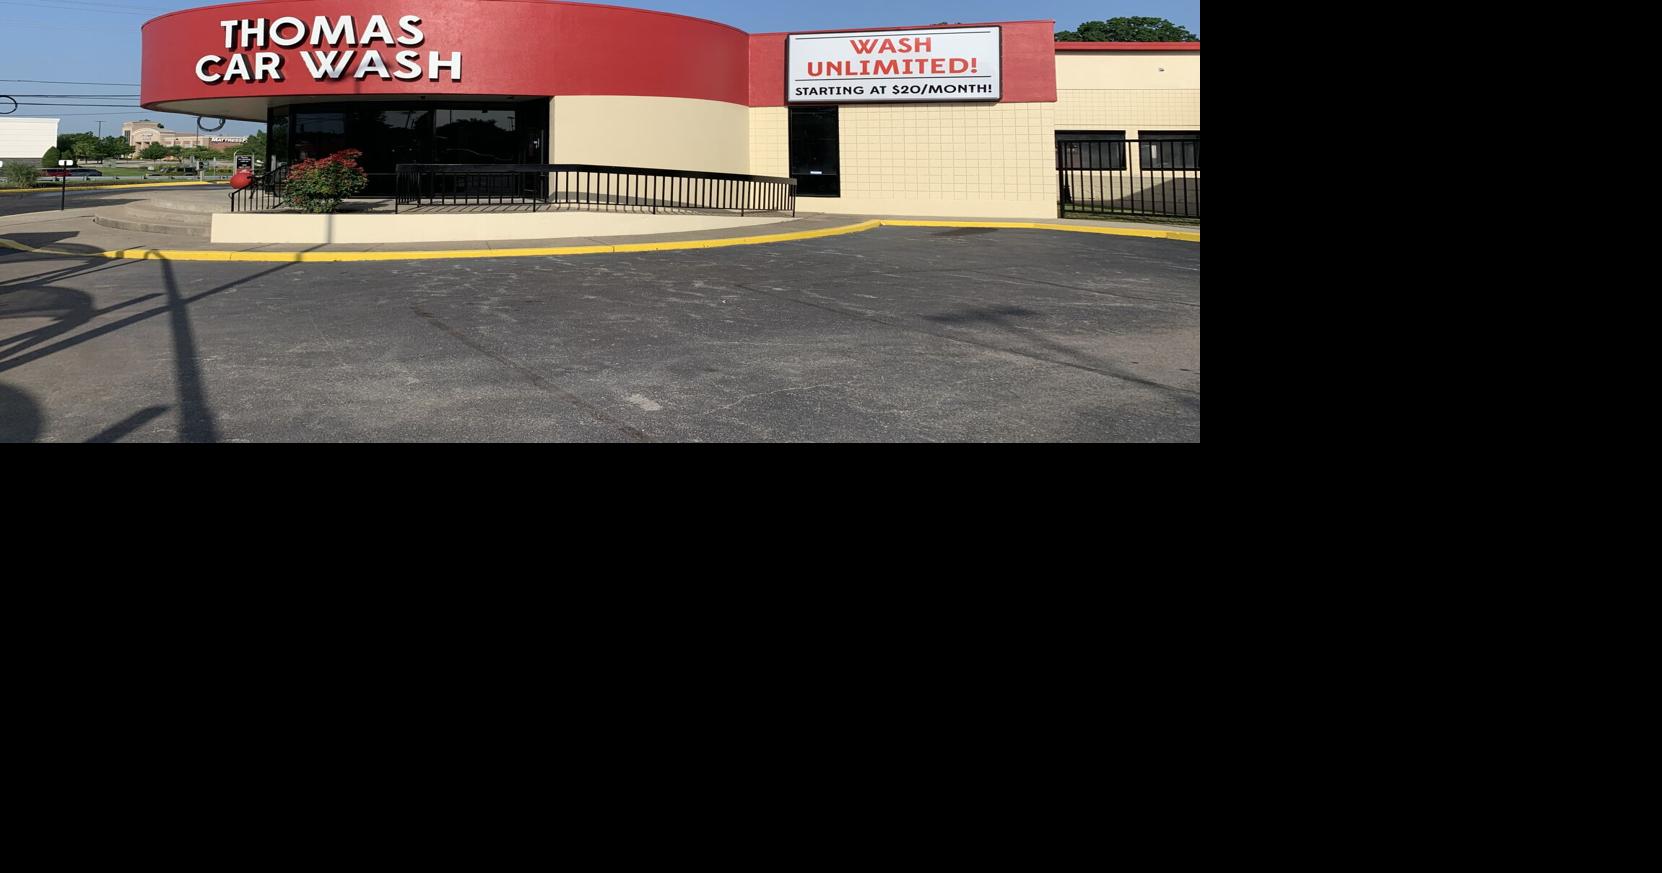 Owners of Thomas Car Wash retire, transfer business to another company | Business